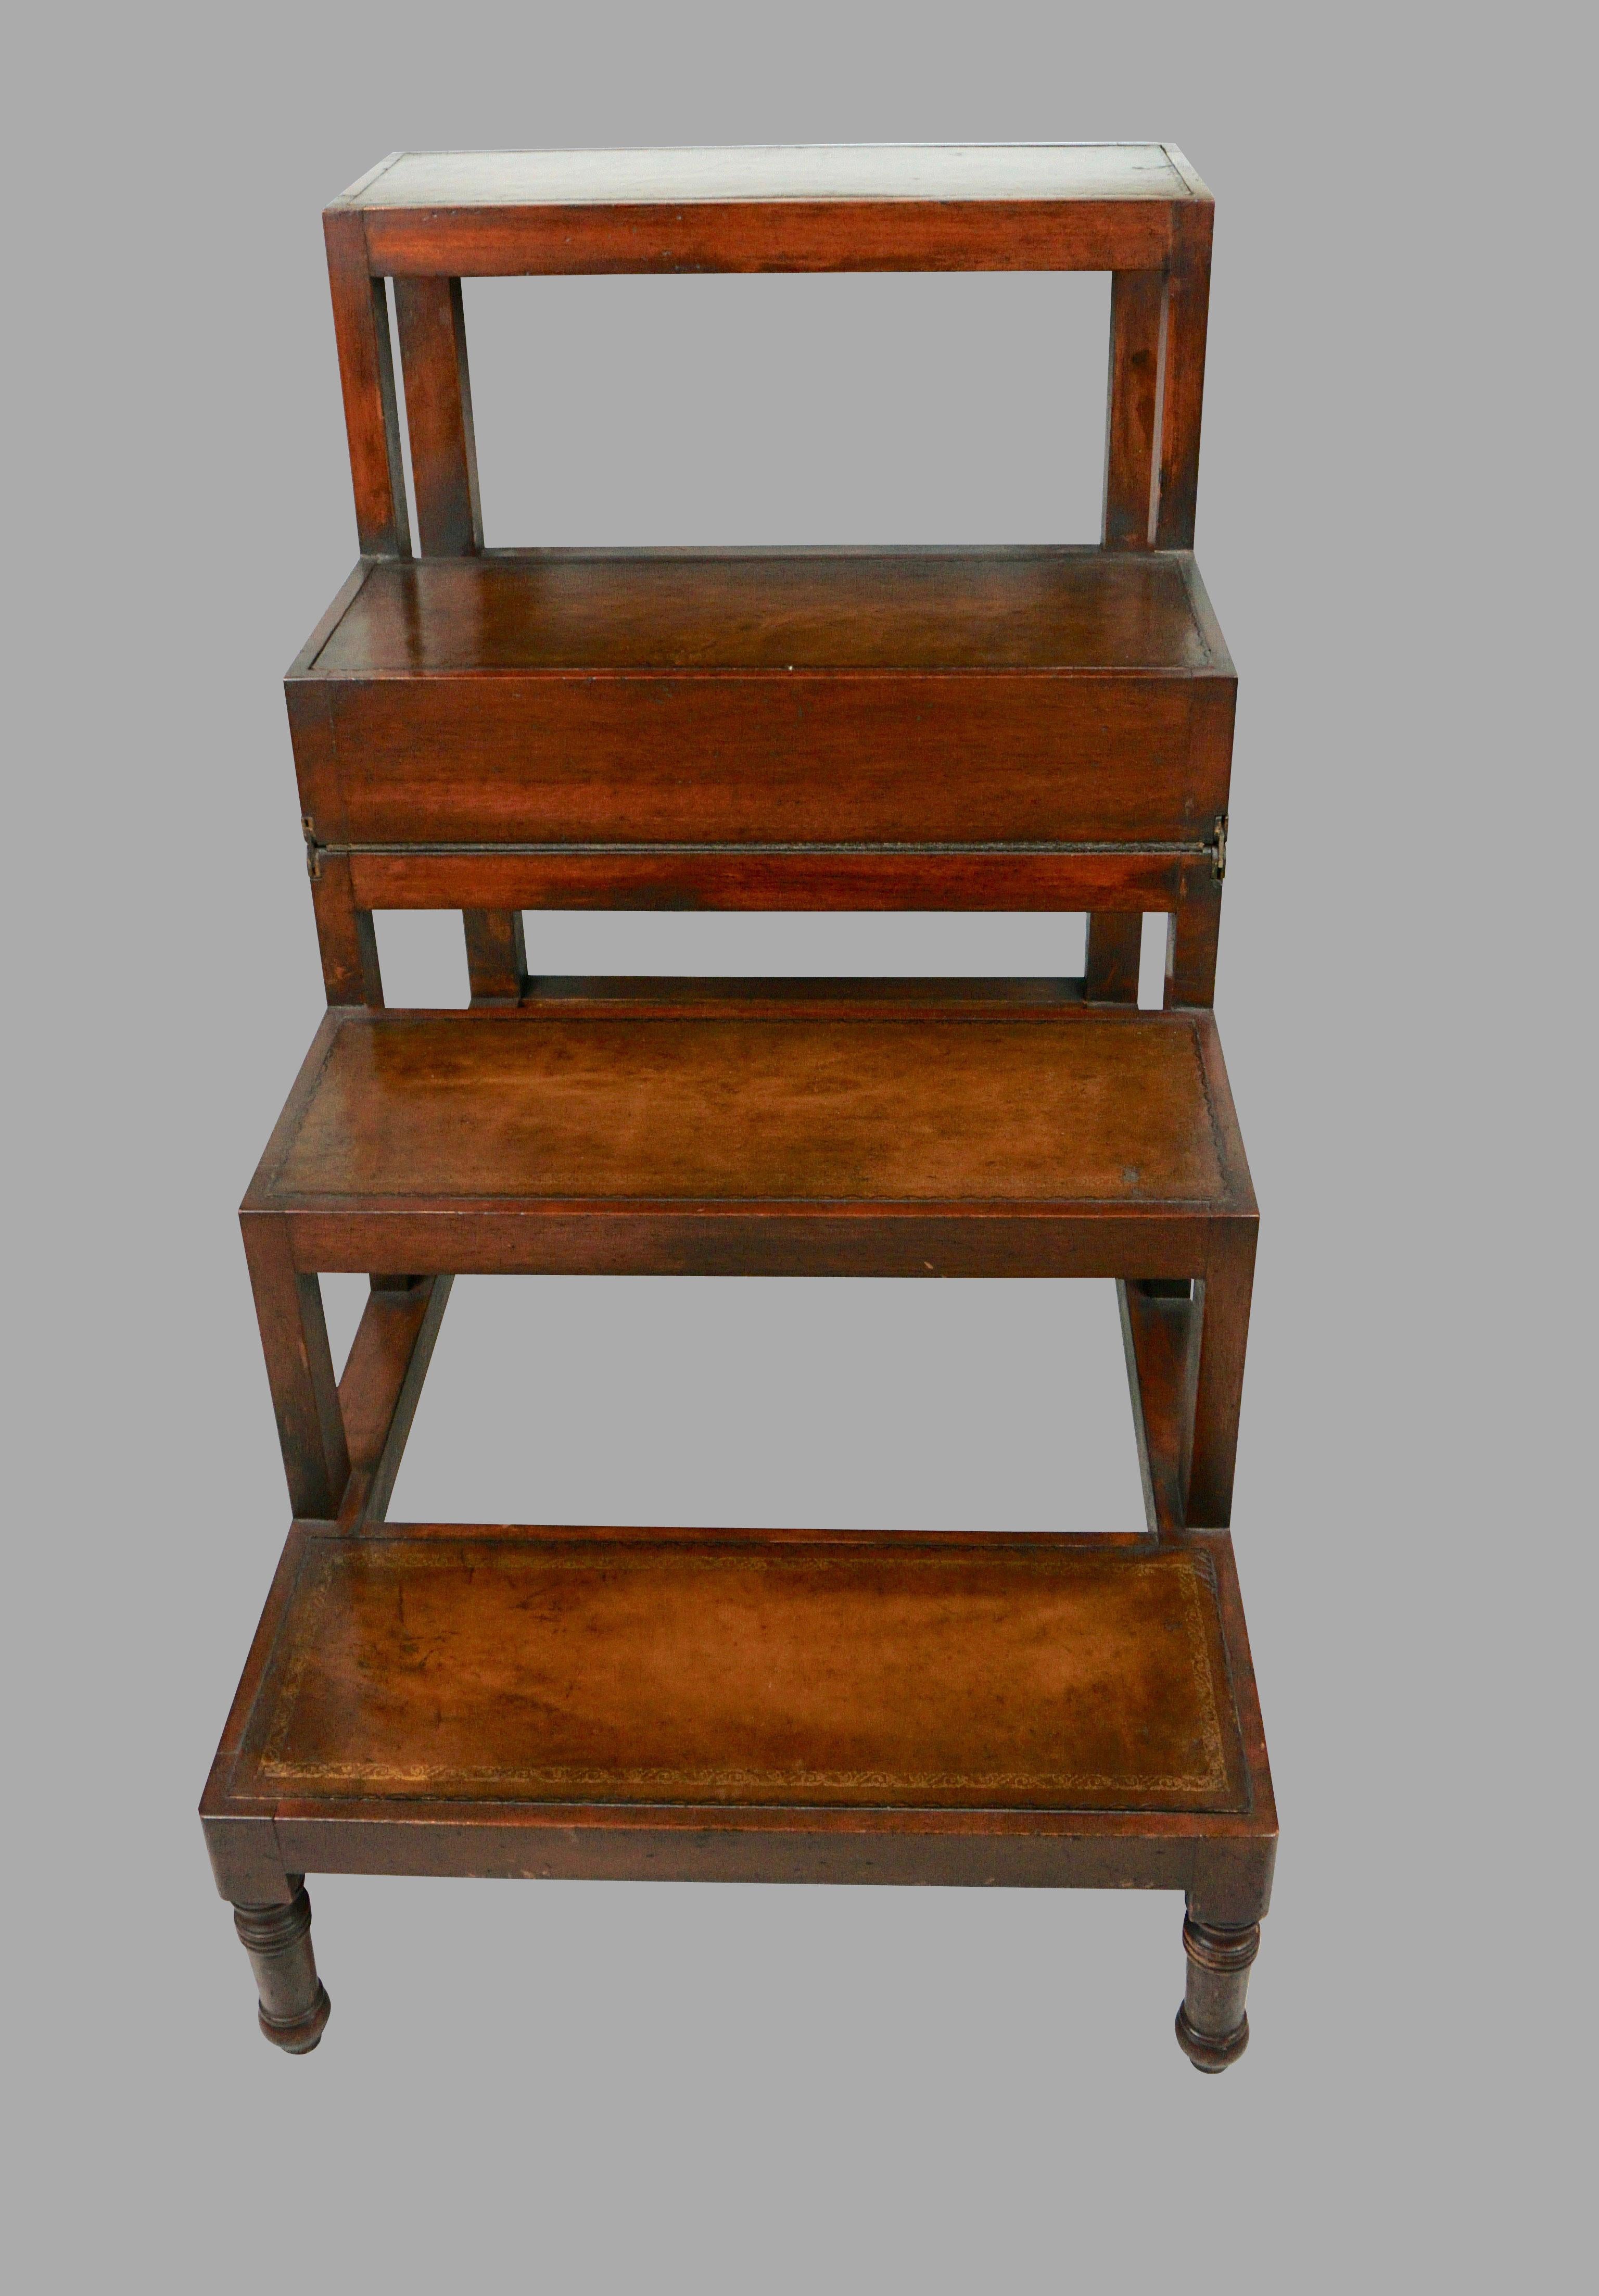 20th Century English Regency Style Mahogany Metamorphic Library Steps with Tooled Leather Top